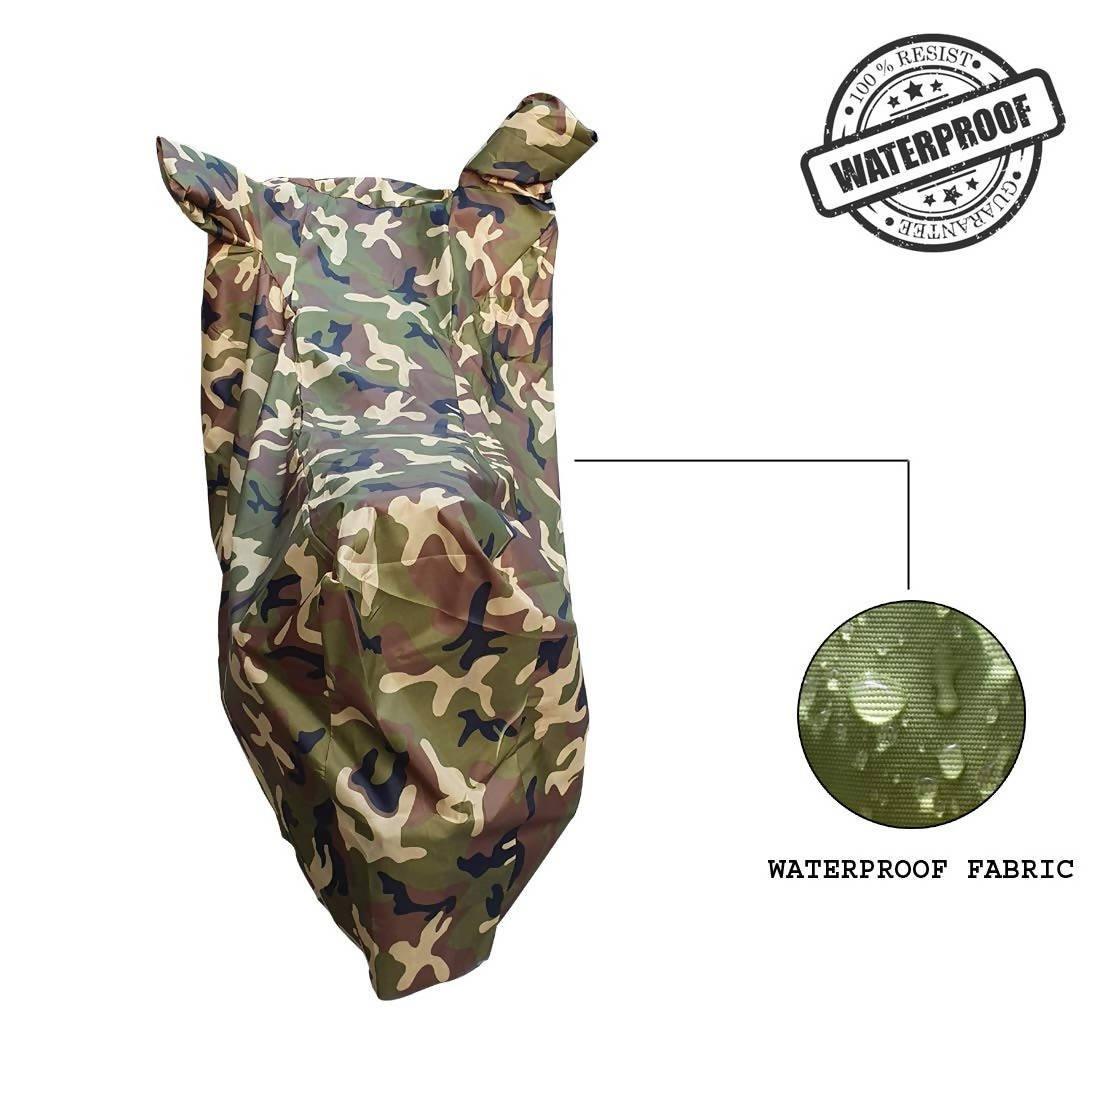 Generic Waterproof Bike Cover for Hero Passion Pro I3s BS6 (Jungle) - Autosparz